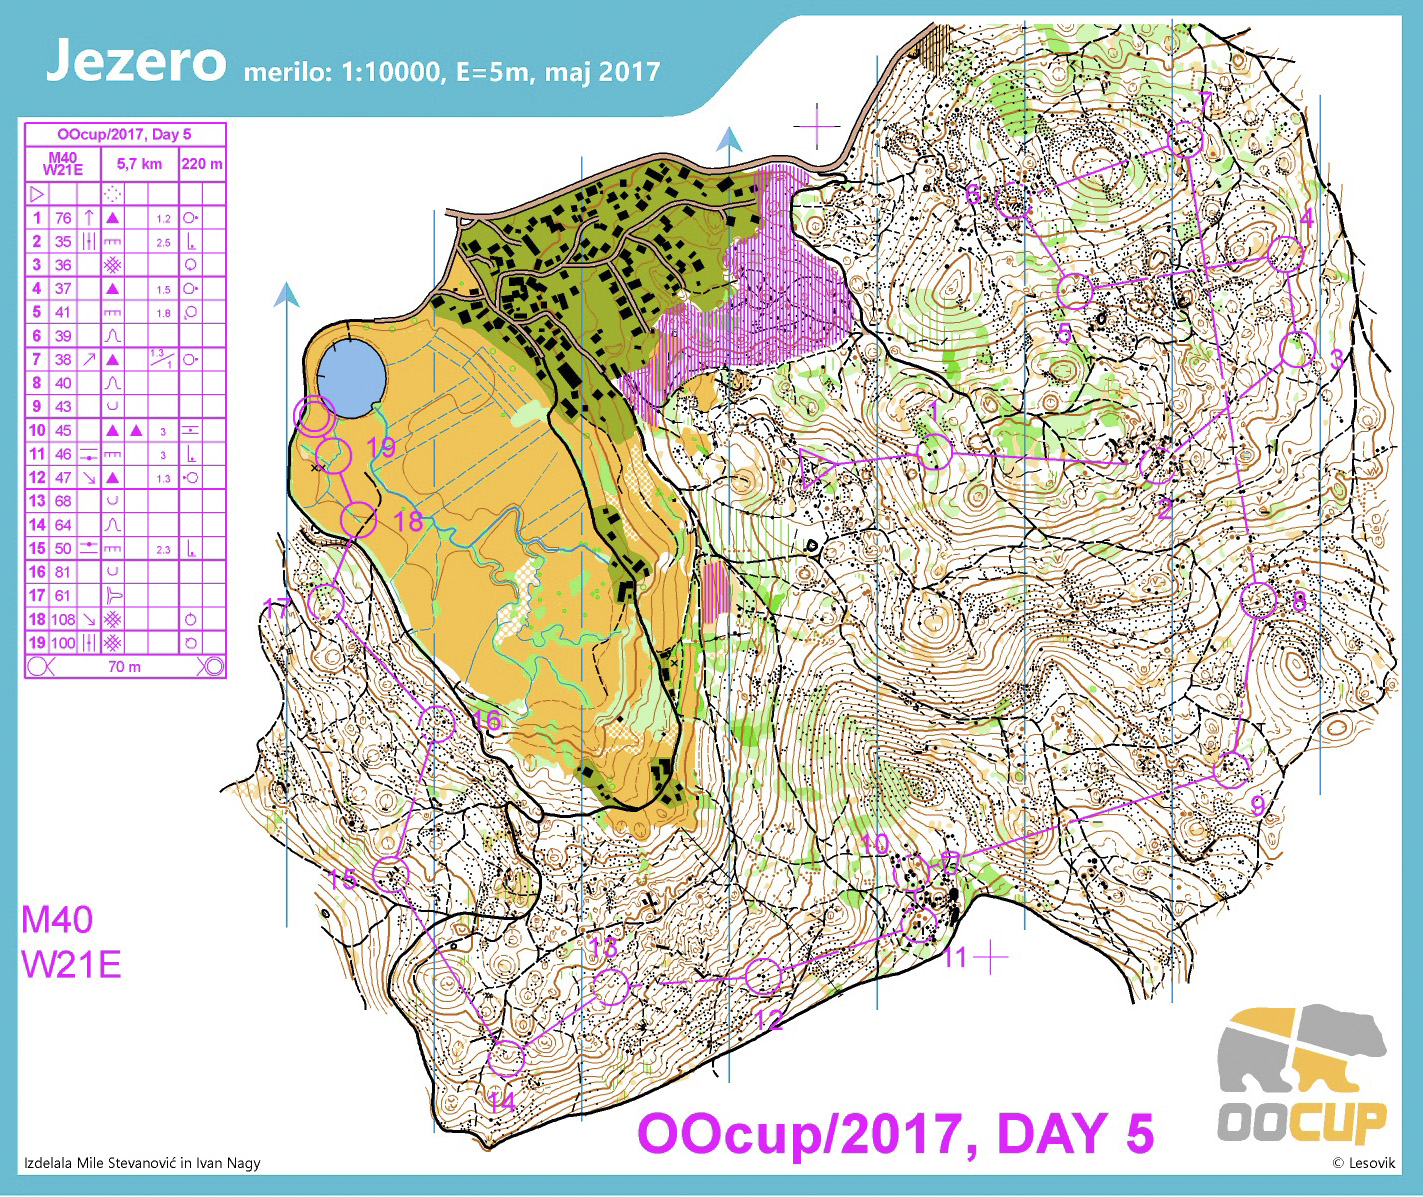 Oocup 2017 Day 5 (29.07.2017)